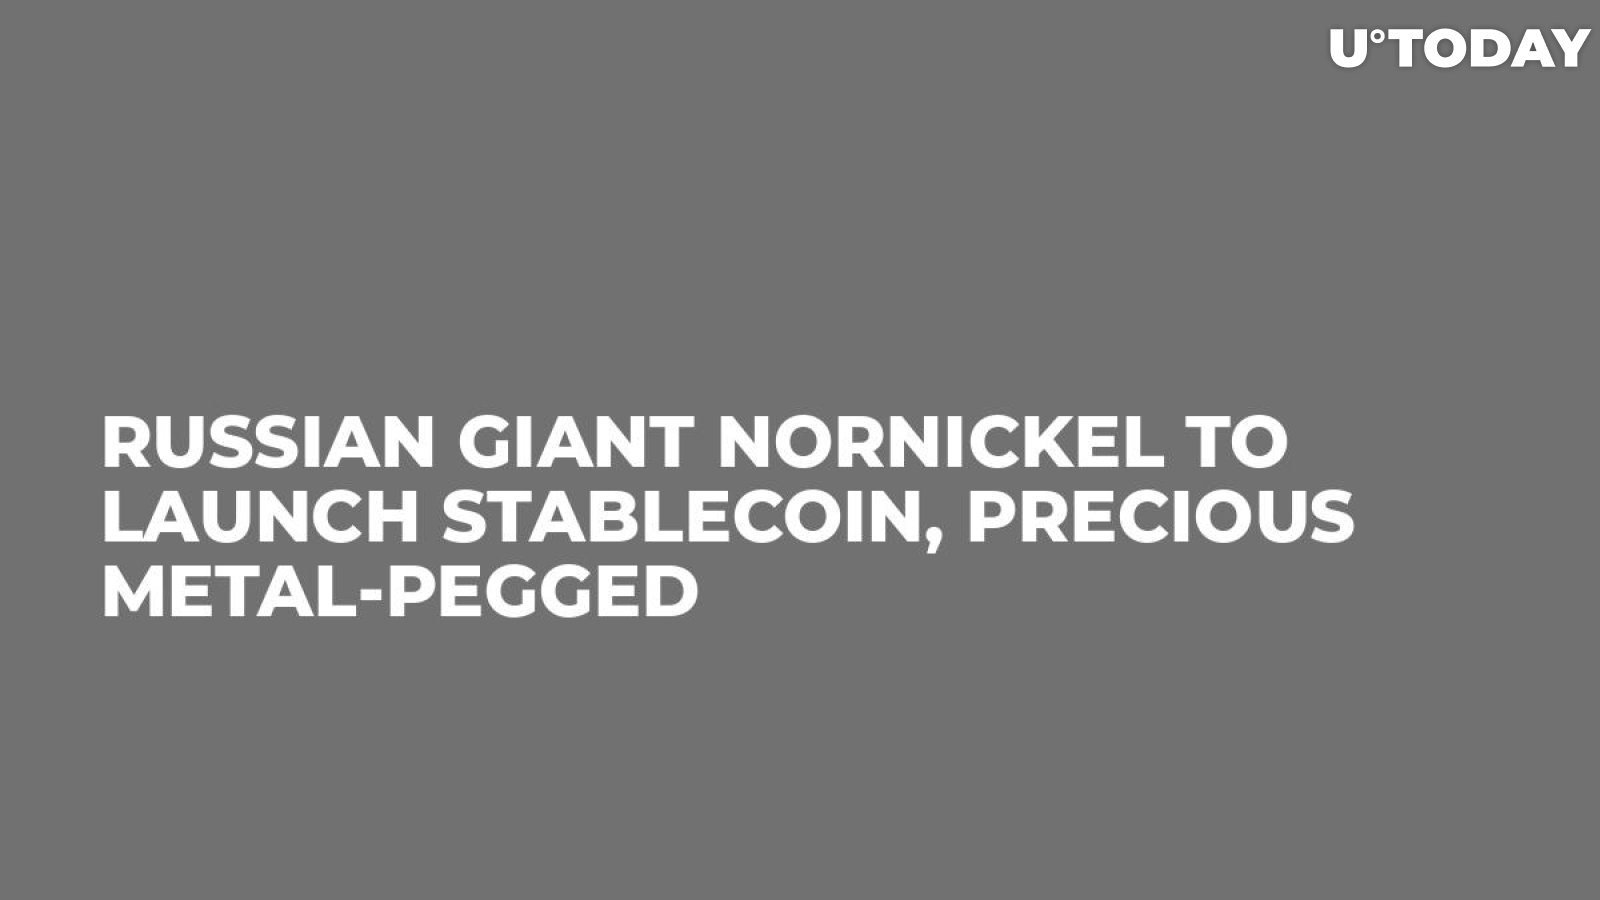 Russian Giant Nornickel to Launch Stablecoin, Precious Metal-Pegged